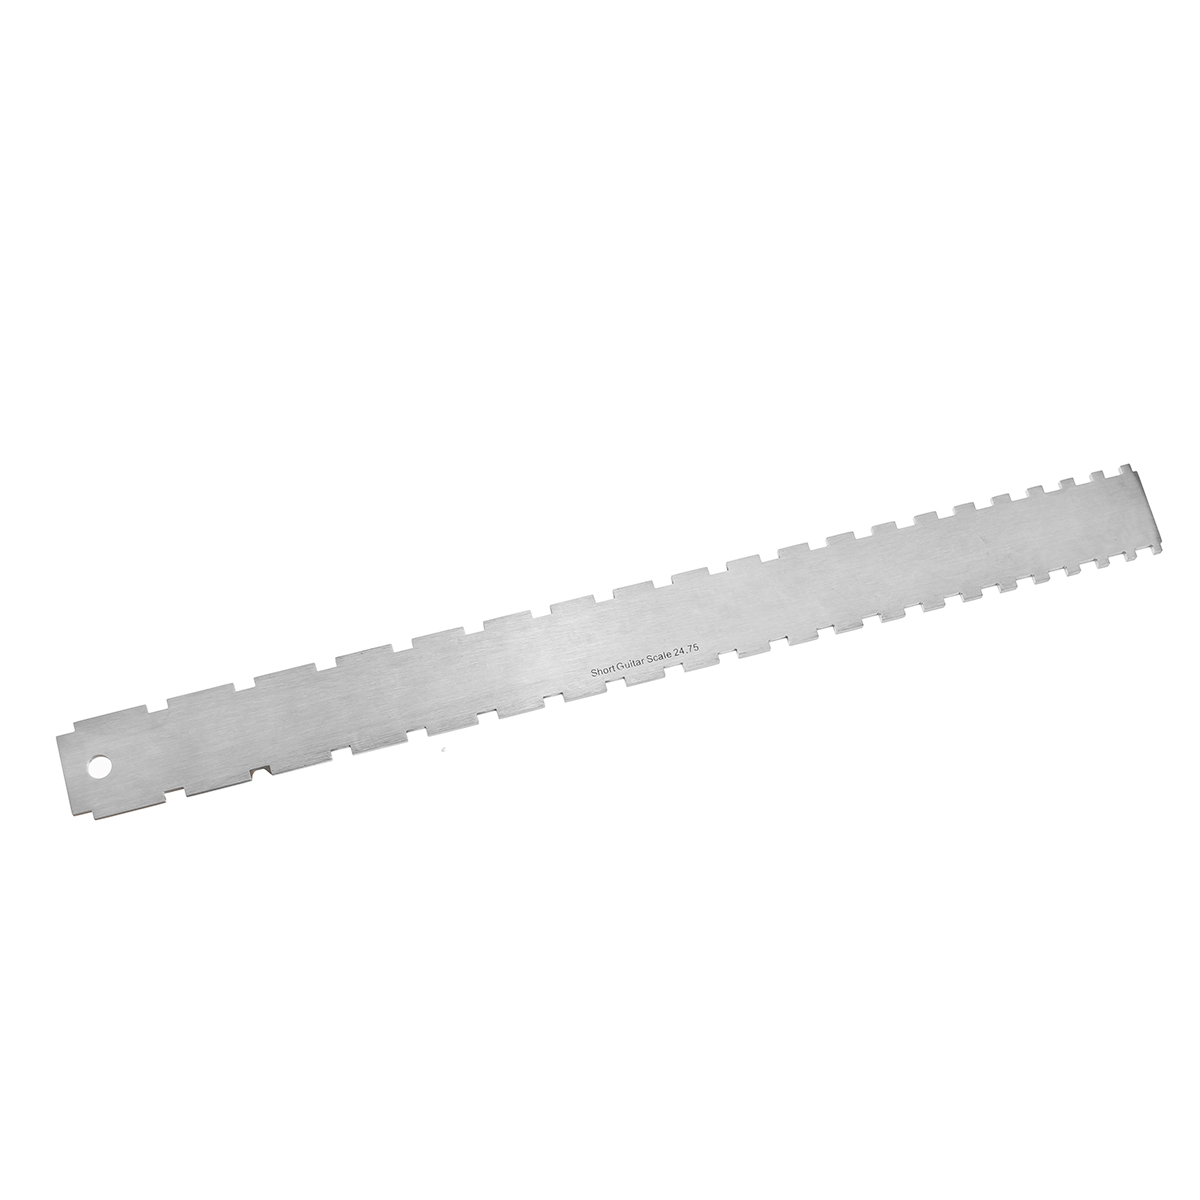 Stainless Steel Guitar Neck Notched Straight Edge Dual Scale Measuring Tool Guitar Fret Ruler for Measuring Fretboard - Photo: 6